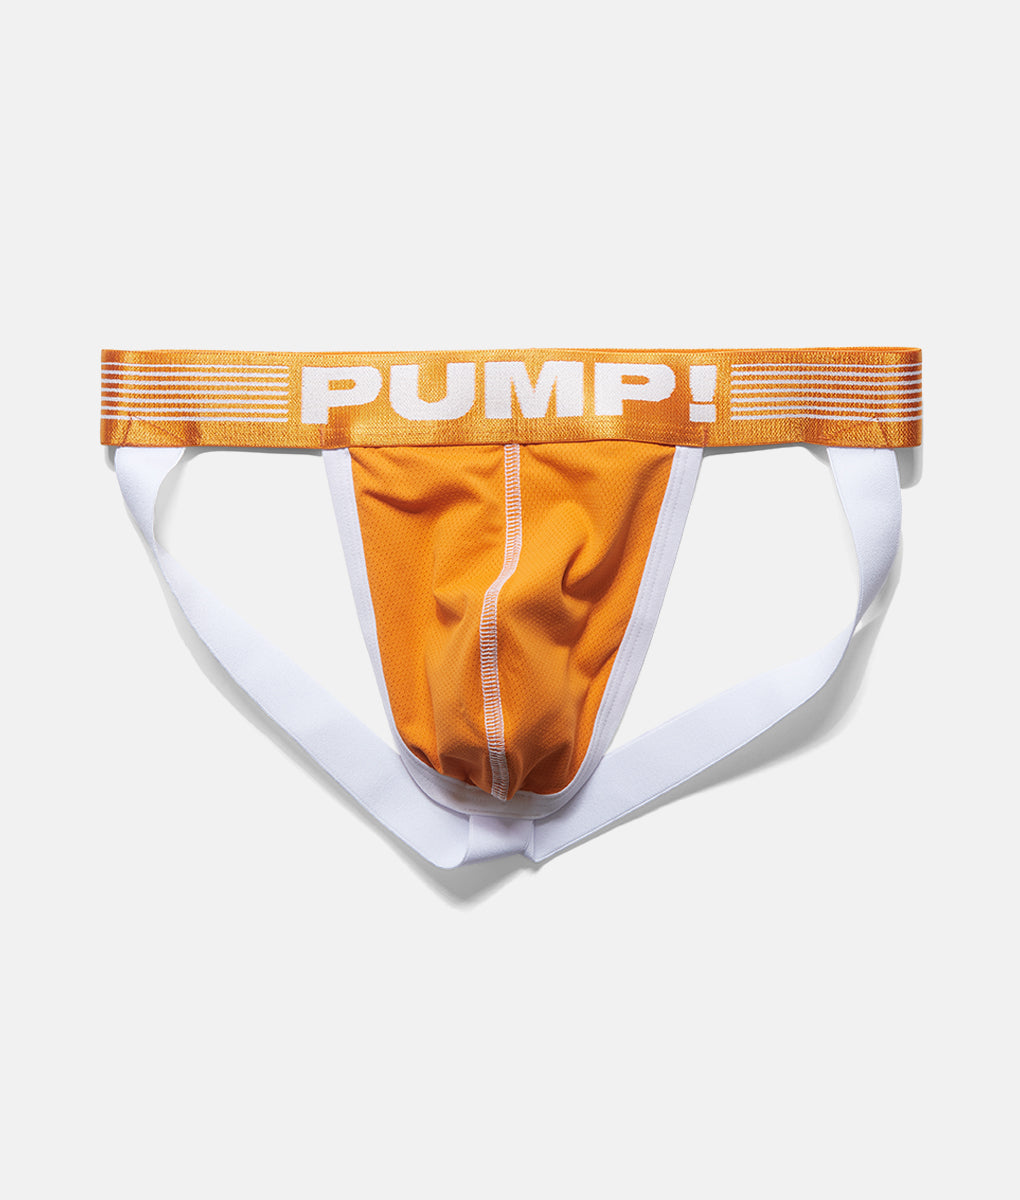 PUMP! Underwear Now Available To Buy At JOCKBOX